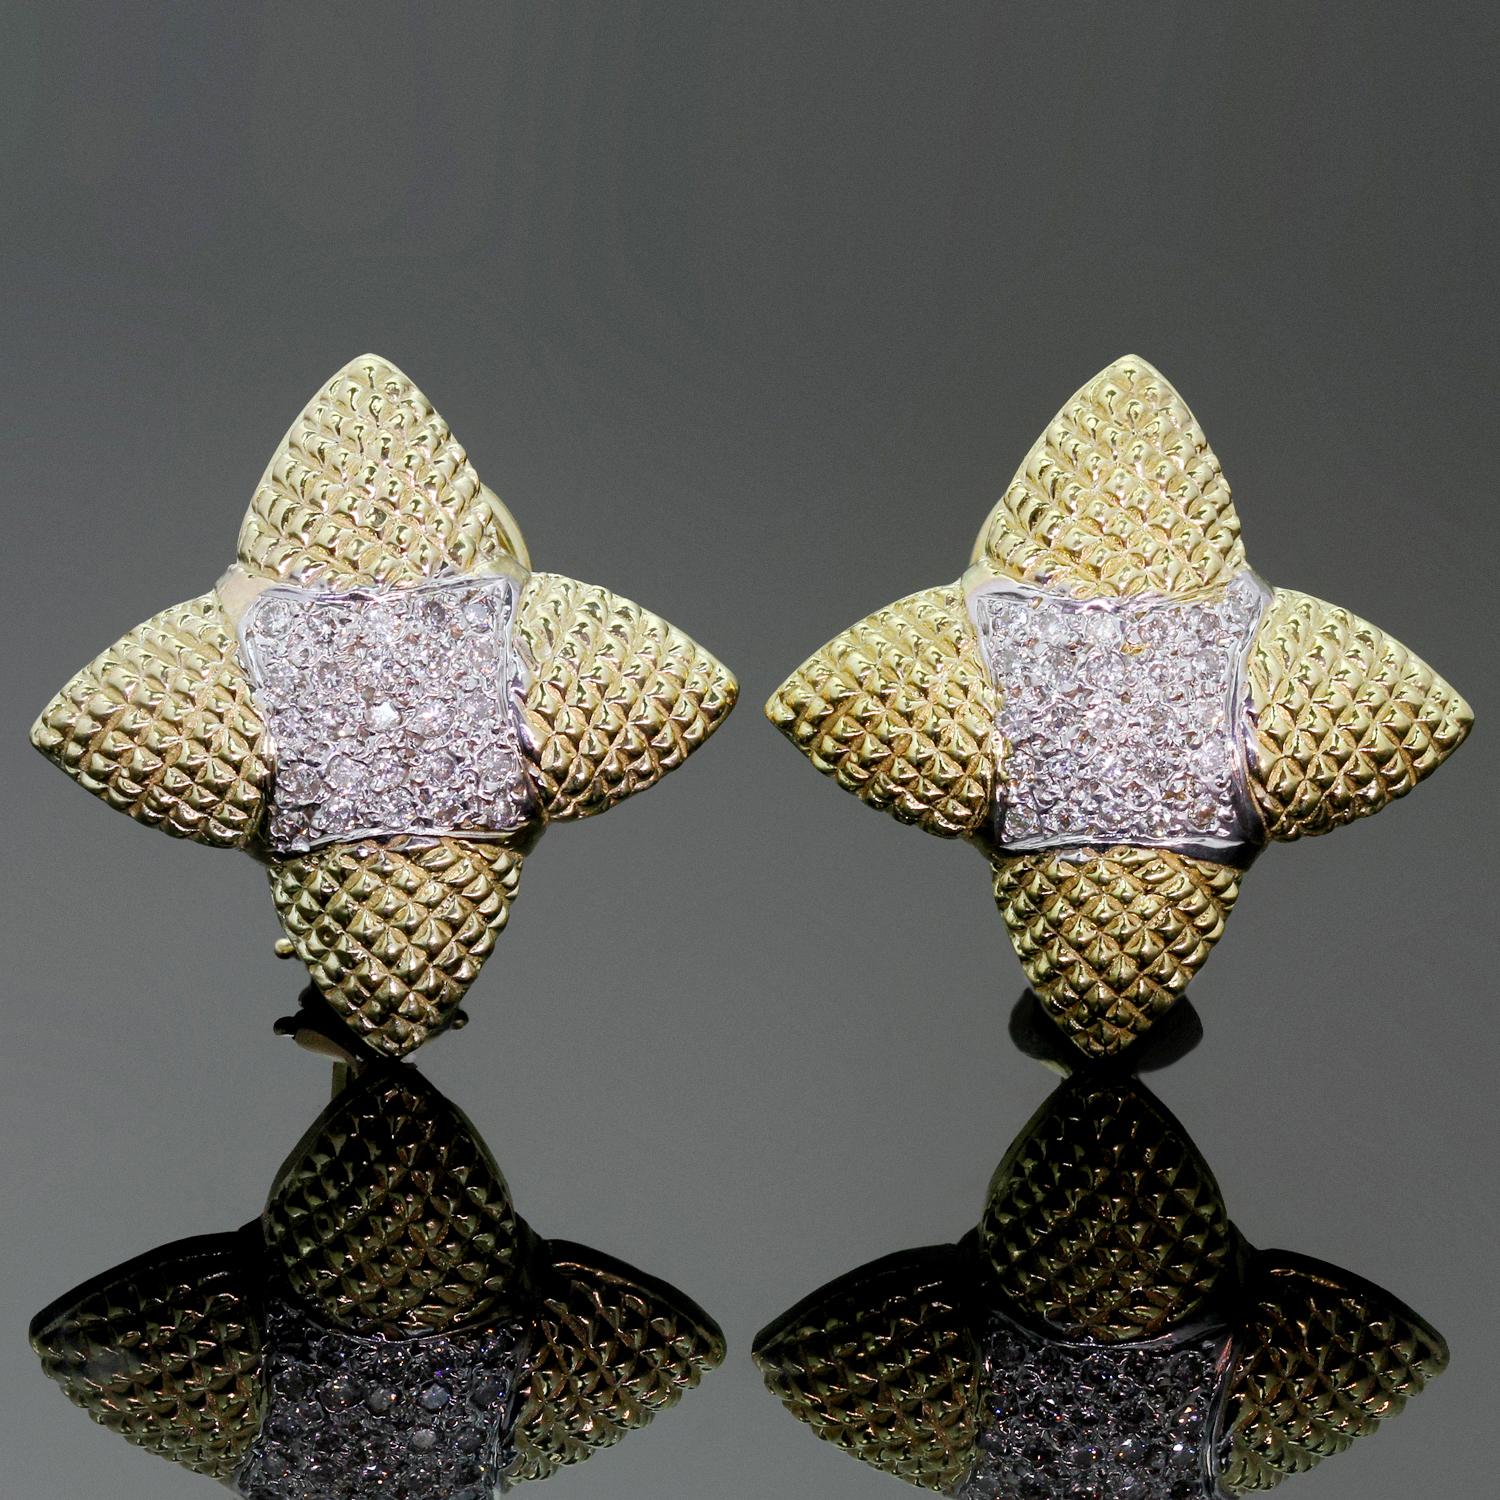 These classic retro earrings features a four-pointed star design crafted in textured 18k yellow gold and pave-set with brilliant-cut round G-H VS2-SI1 diamonds of an estimated 0.50 carats. Made in United States circa 1960s. Measurements: 1.02